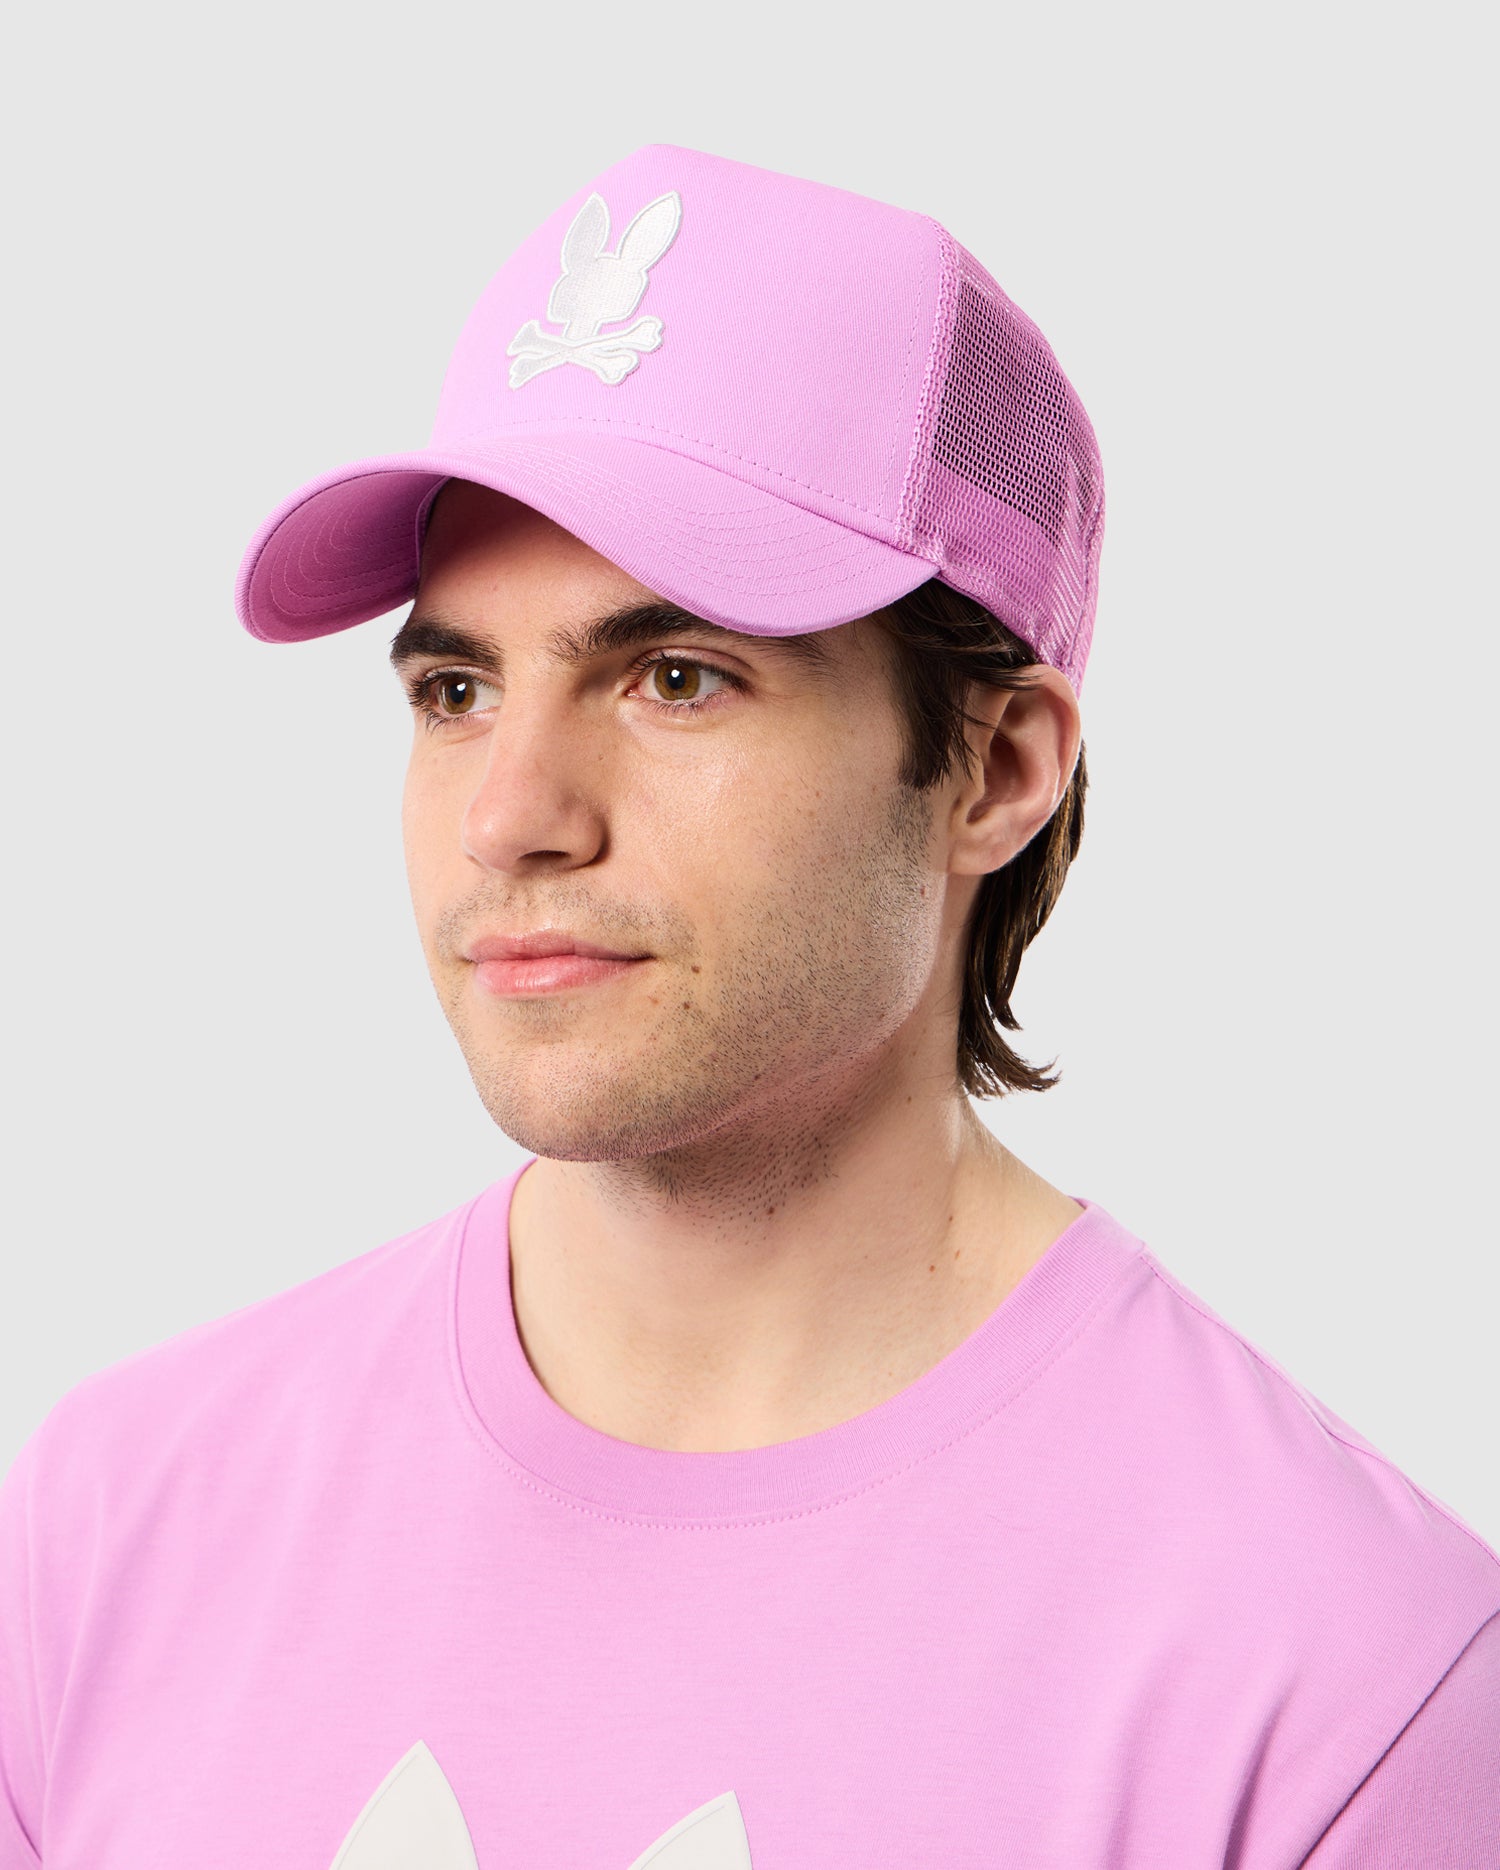 A man wearing a pink t-shirt and a matching pink Psycho Bunny Houston trucker cap with embroidered eyelet vents and a white rabbit logo on it, looking to his left against a light gray background.